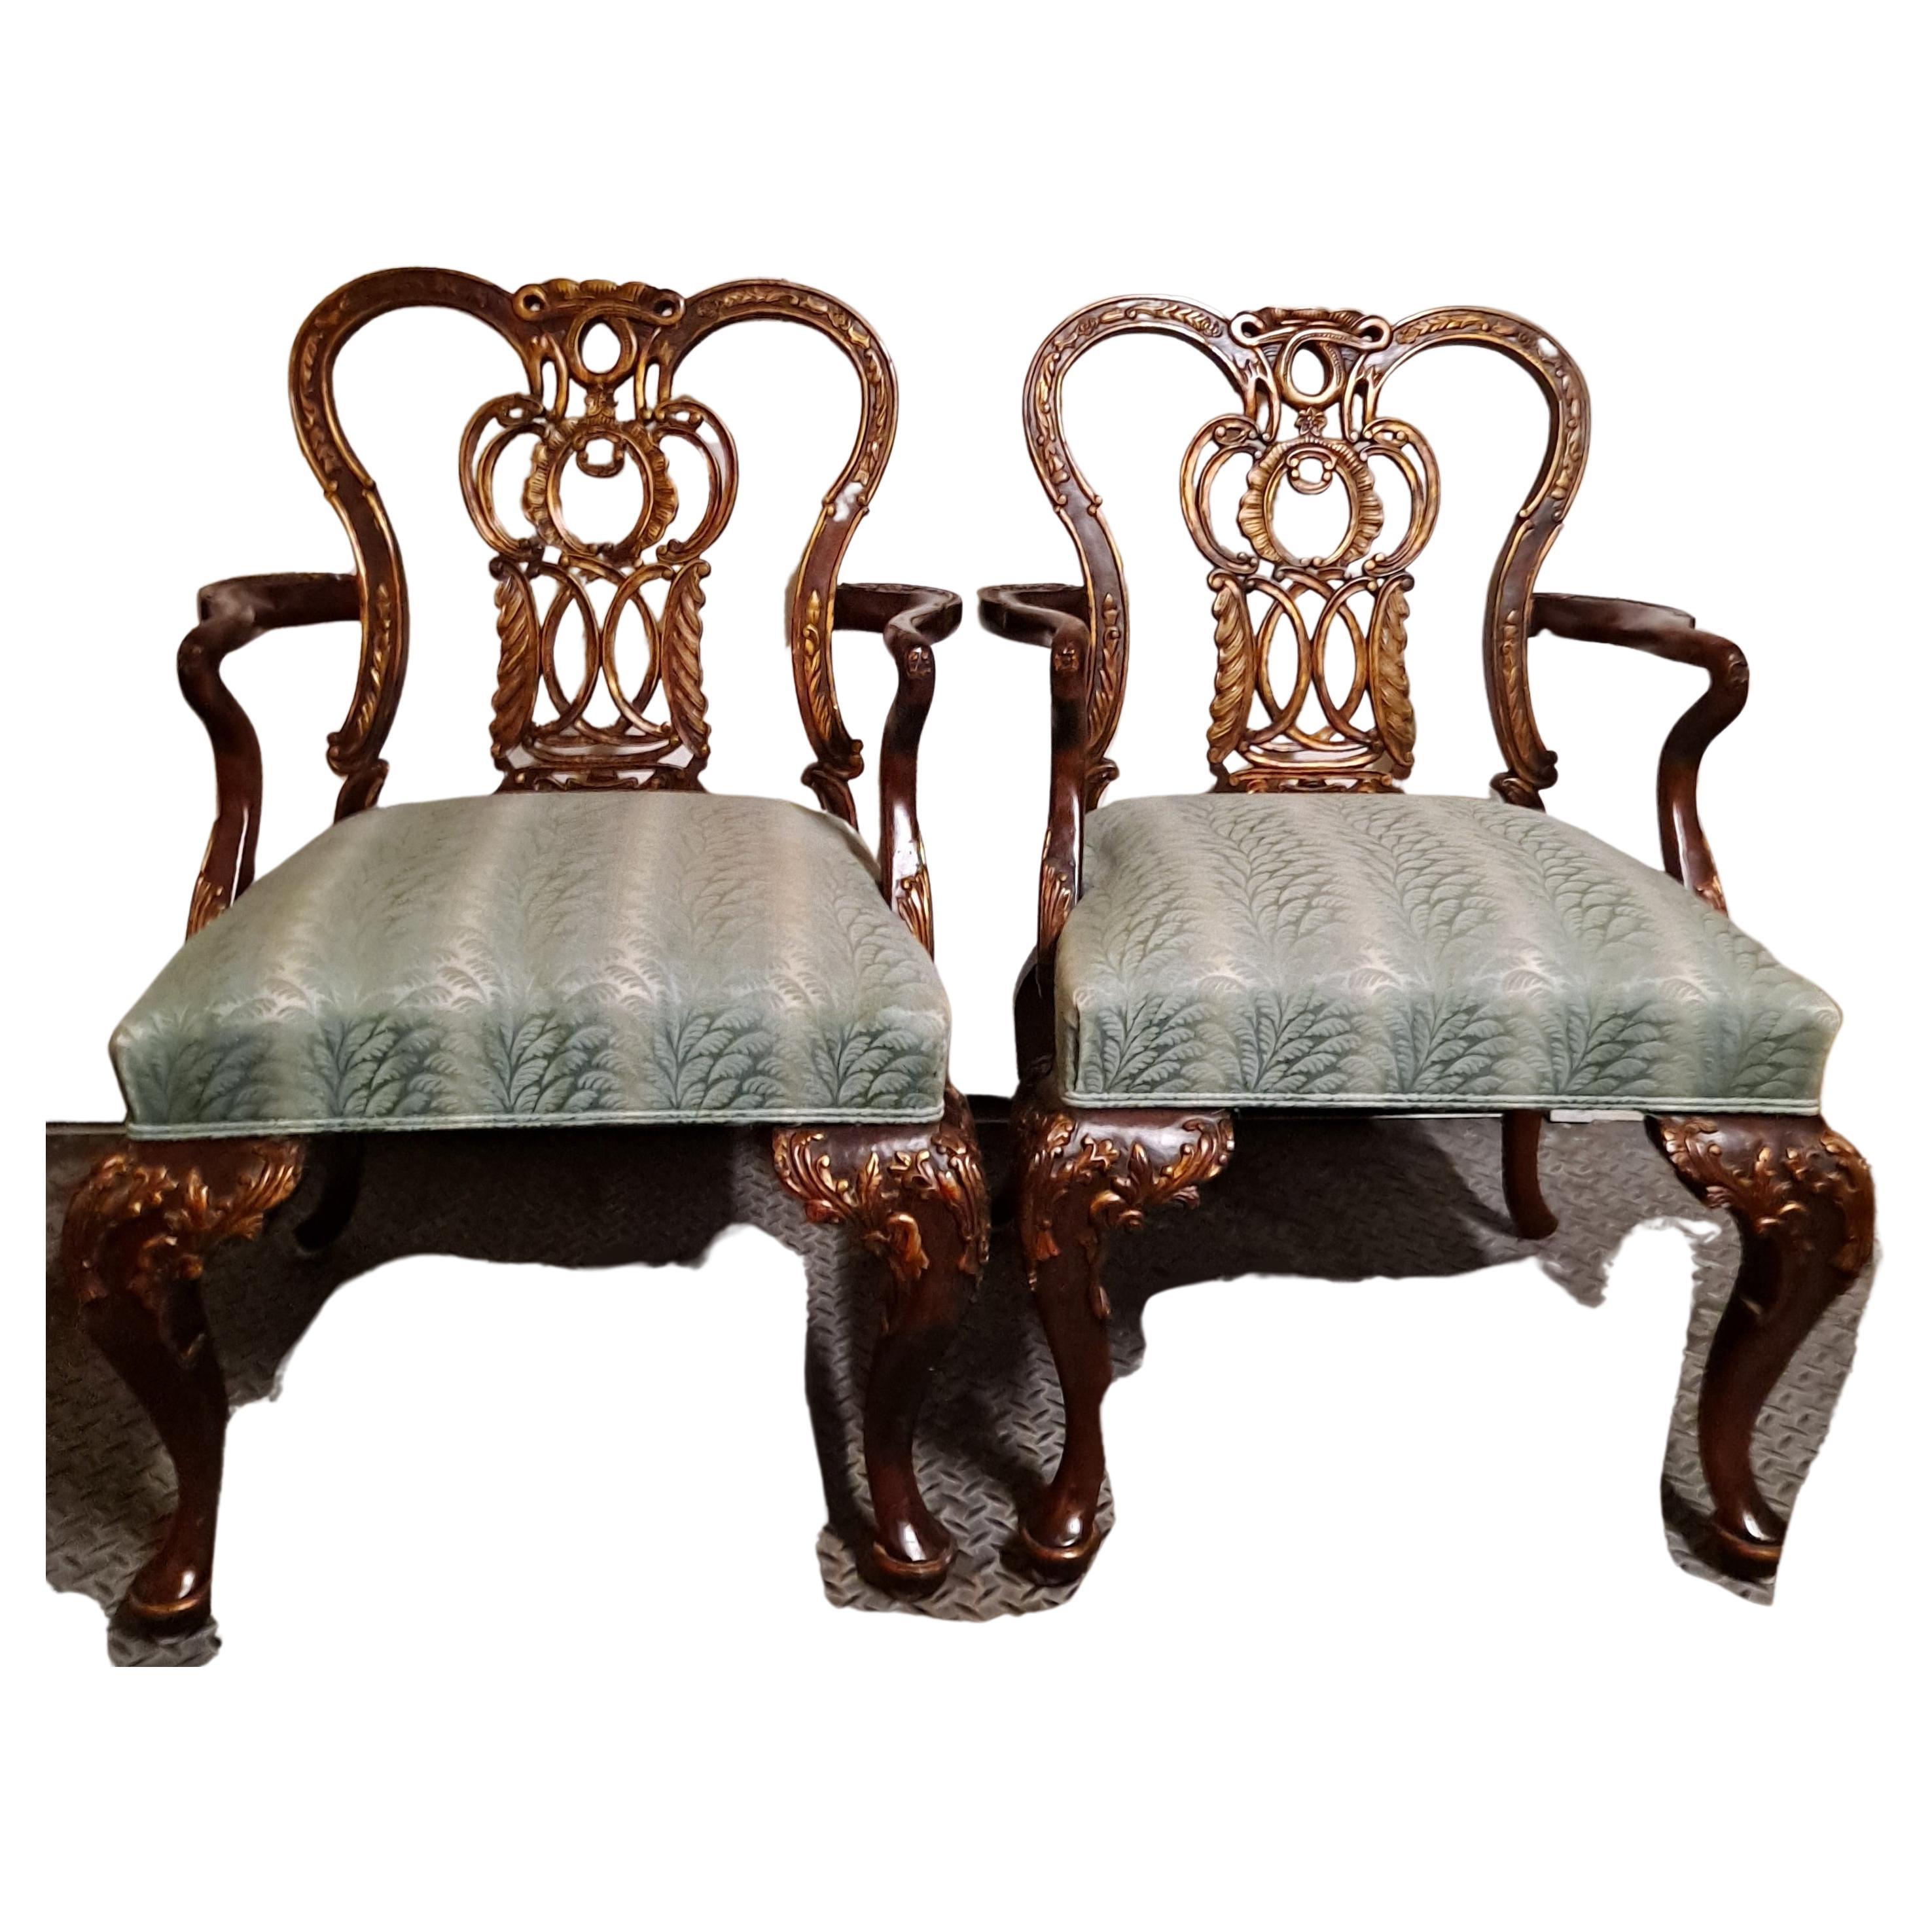 Pair of mahogany century armchair Chippendale revival. Striped upholstery with gooseneck arms carving

26 x 22 x 37